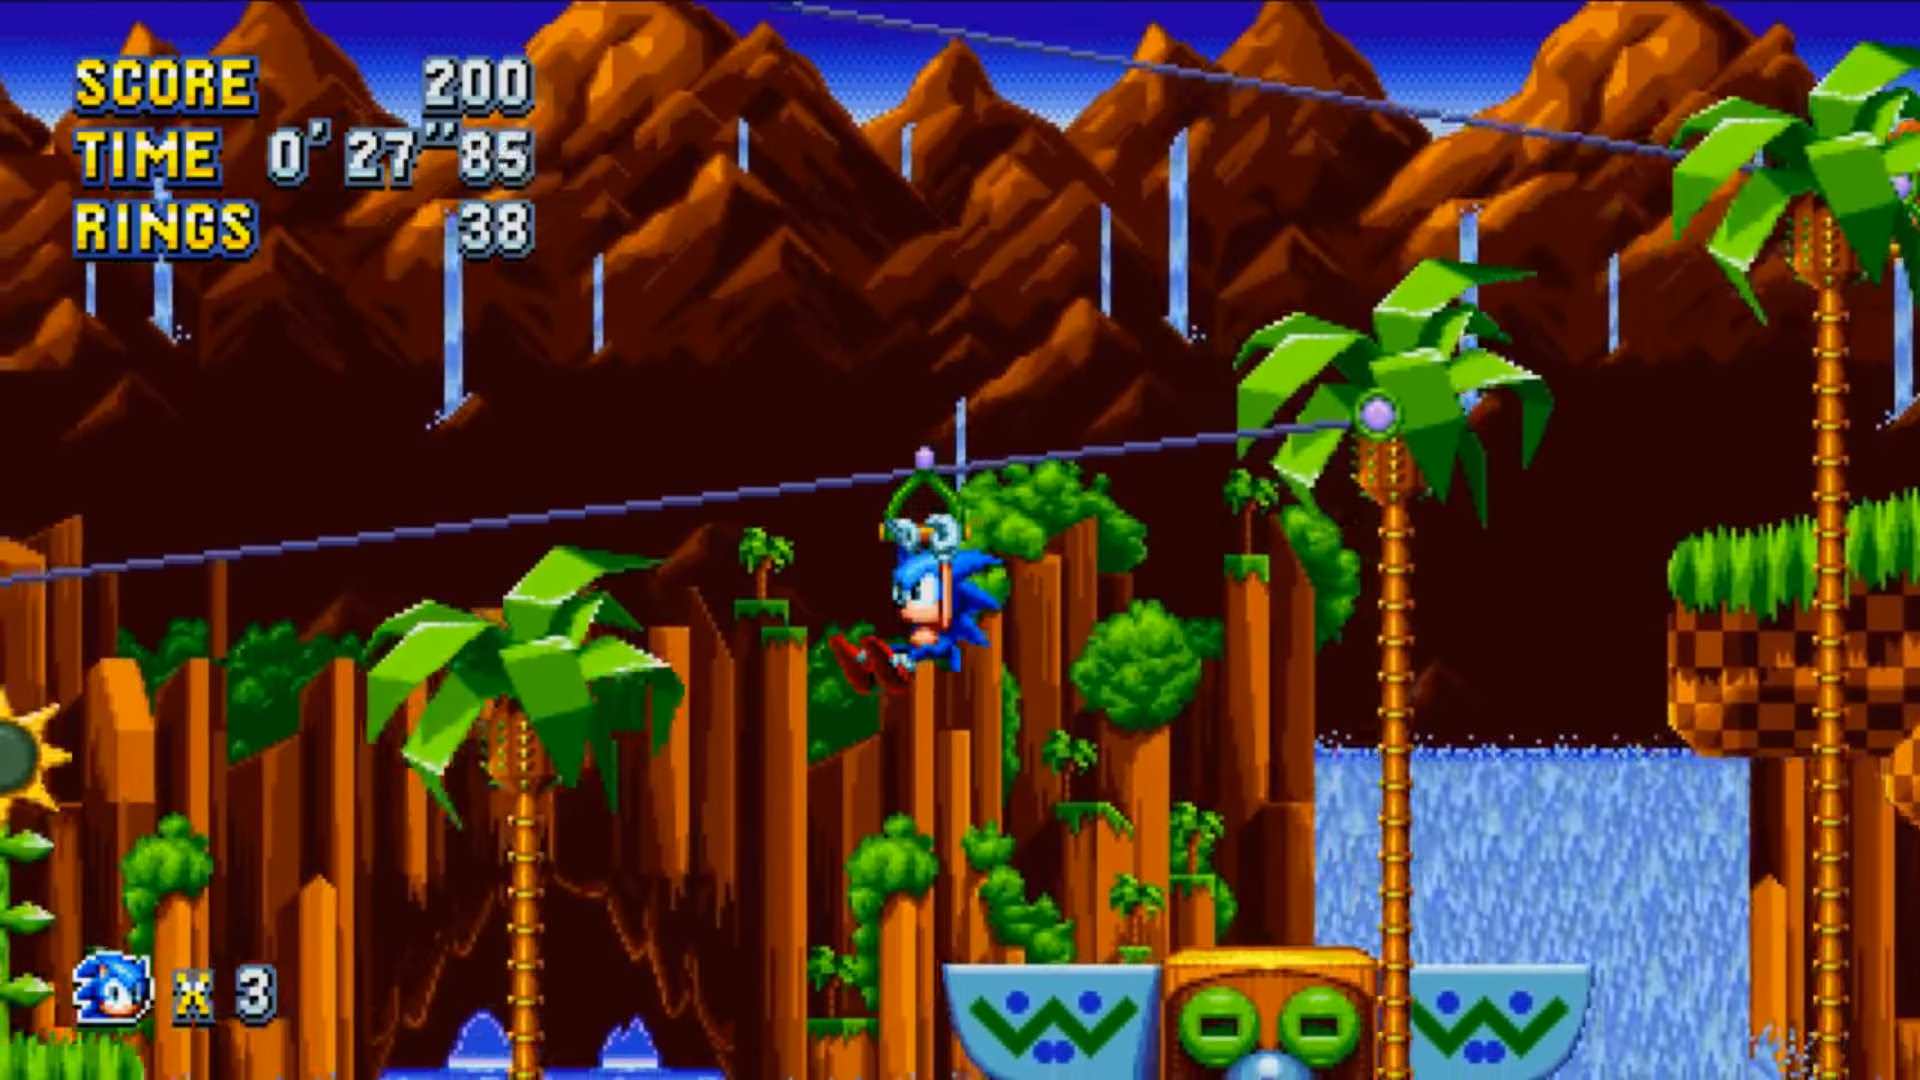 Green Hill Zone Act 2 from Sonic Mania #sonic #sonicthehedgehog #sonic